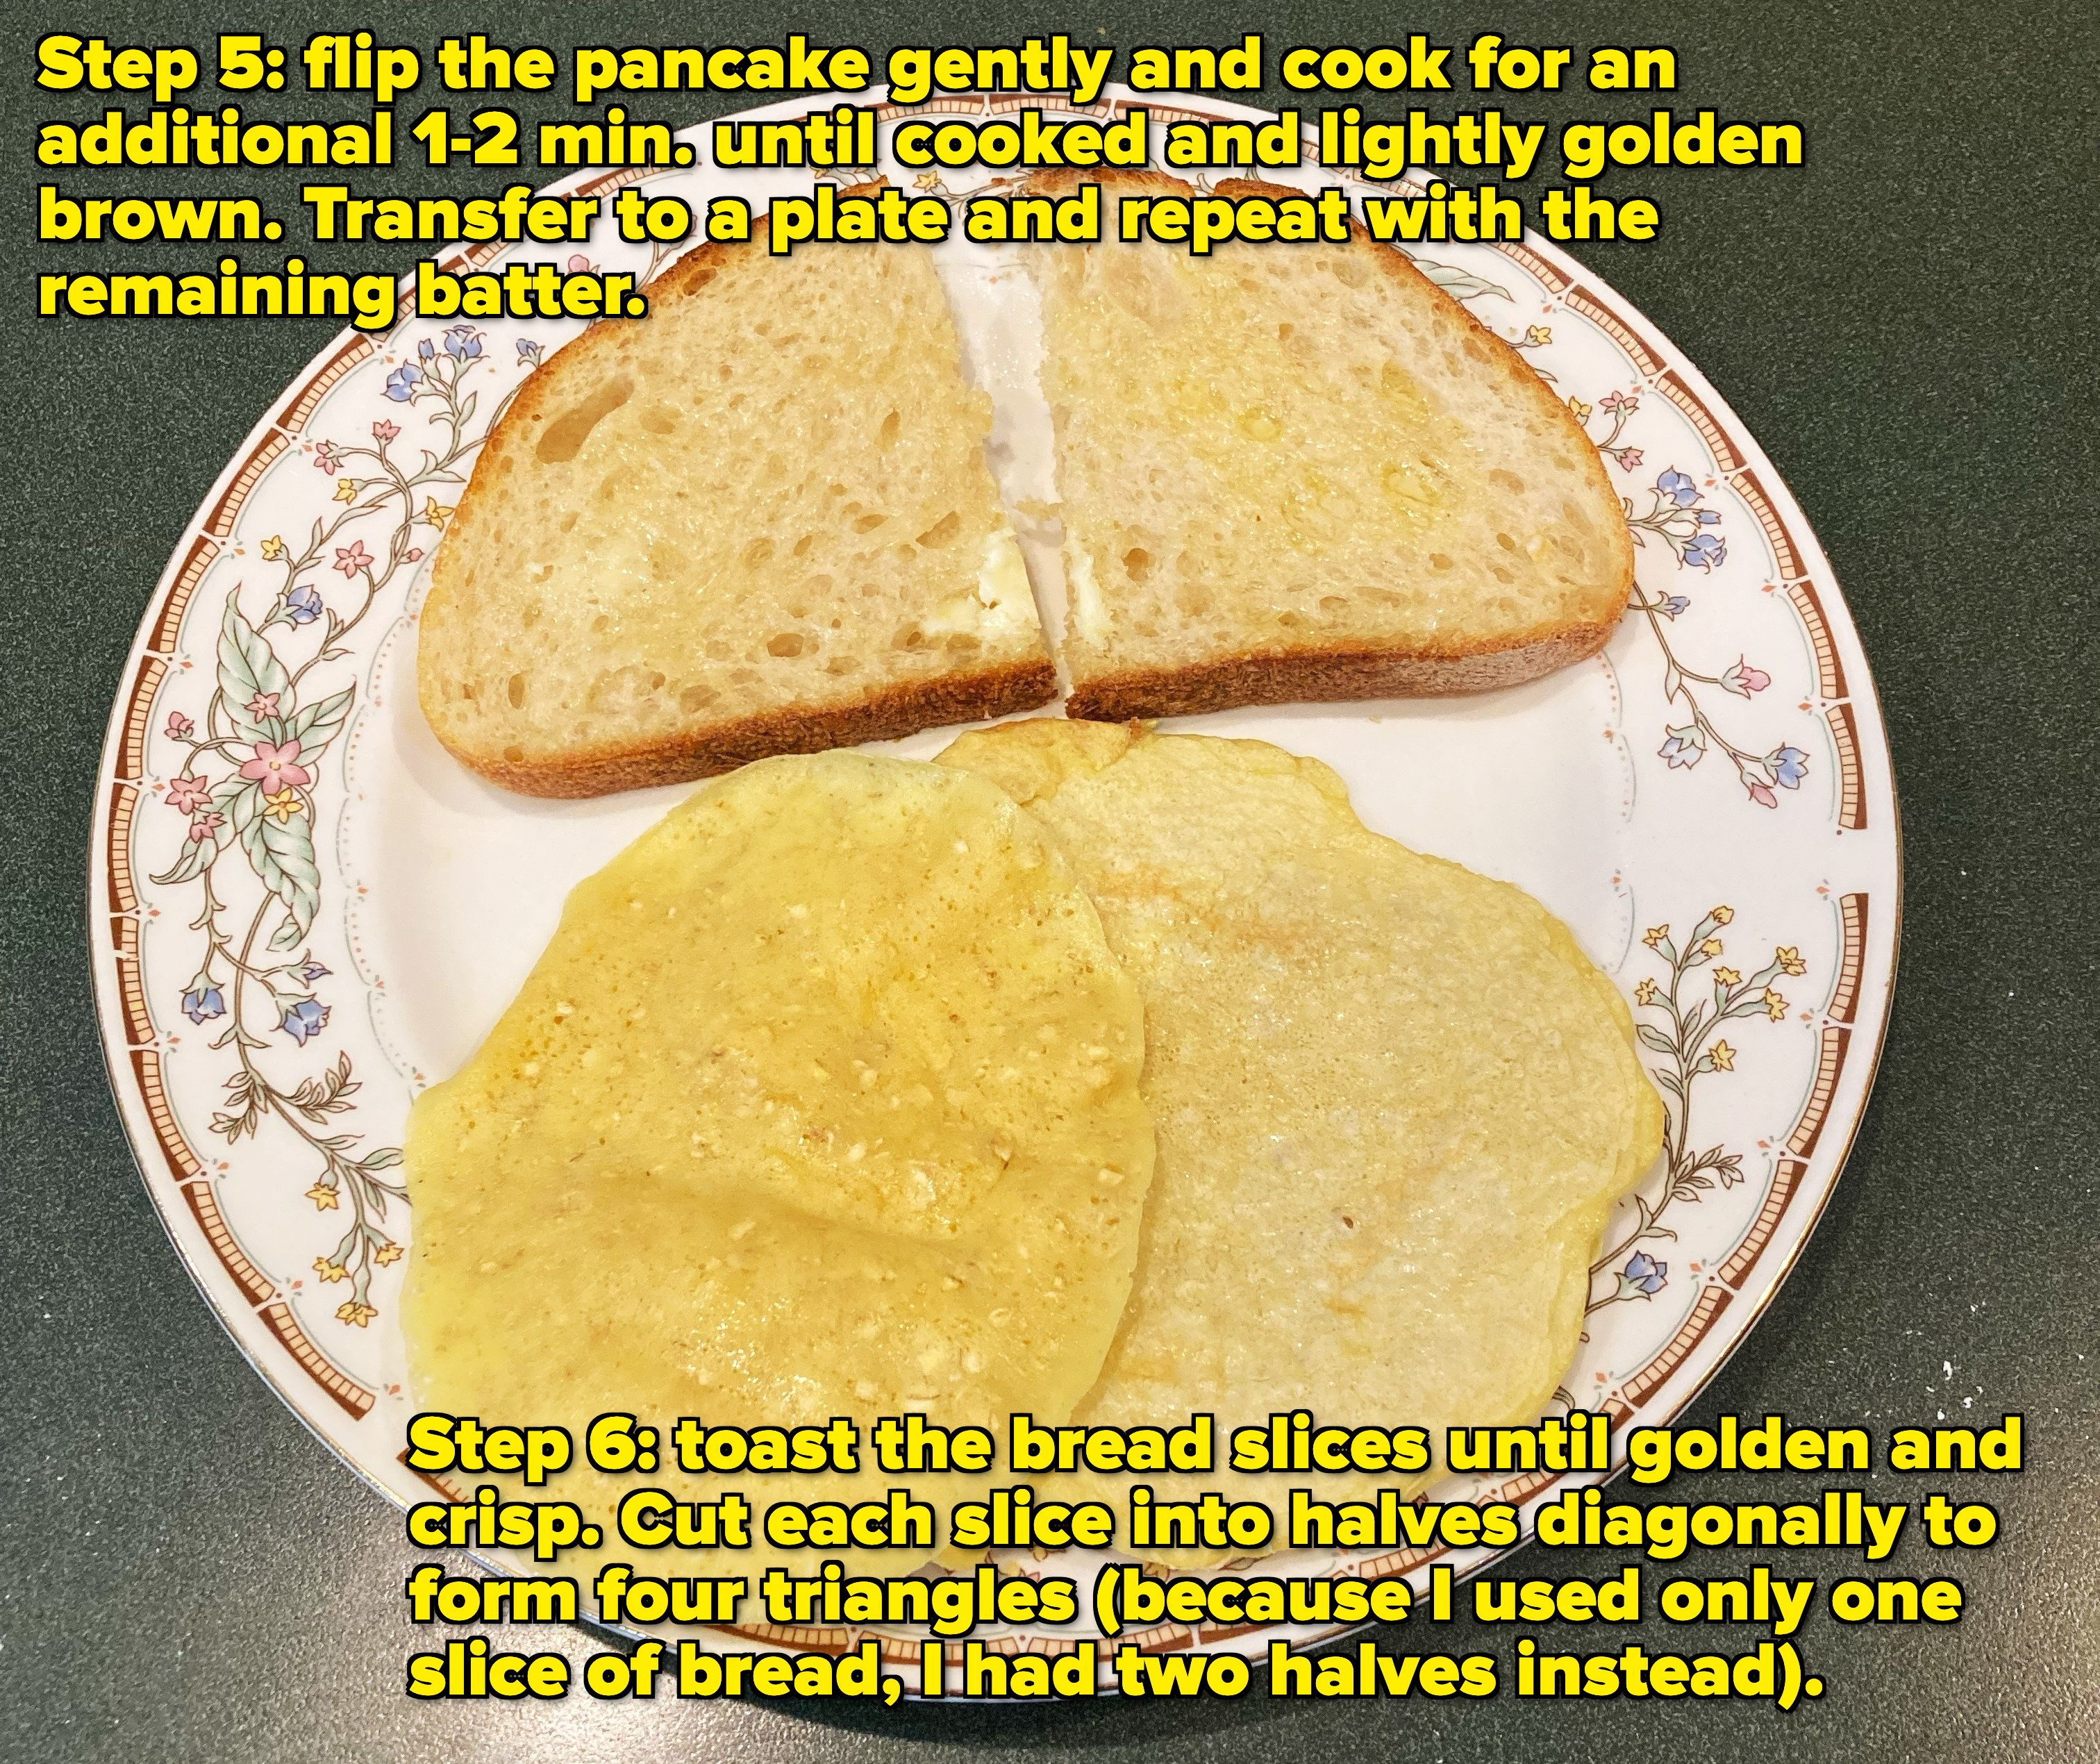 photo of step 5 and 6 with the the words &quot;flip the pancake and cook for an additional 1 to 2 minutes until cooked and golden brown, transfer to a plate and repeat&quot; and &quot;toast the bread slices until golden and crisp, cut each slice diagonally